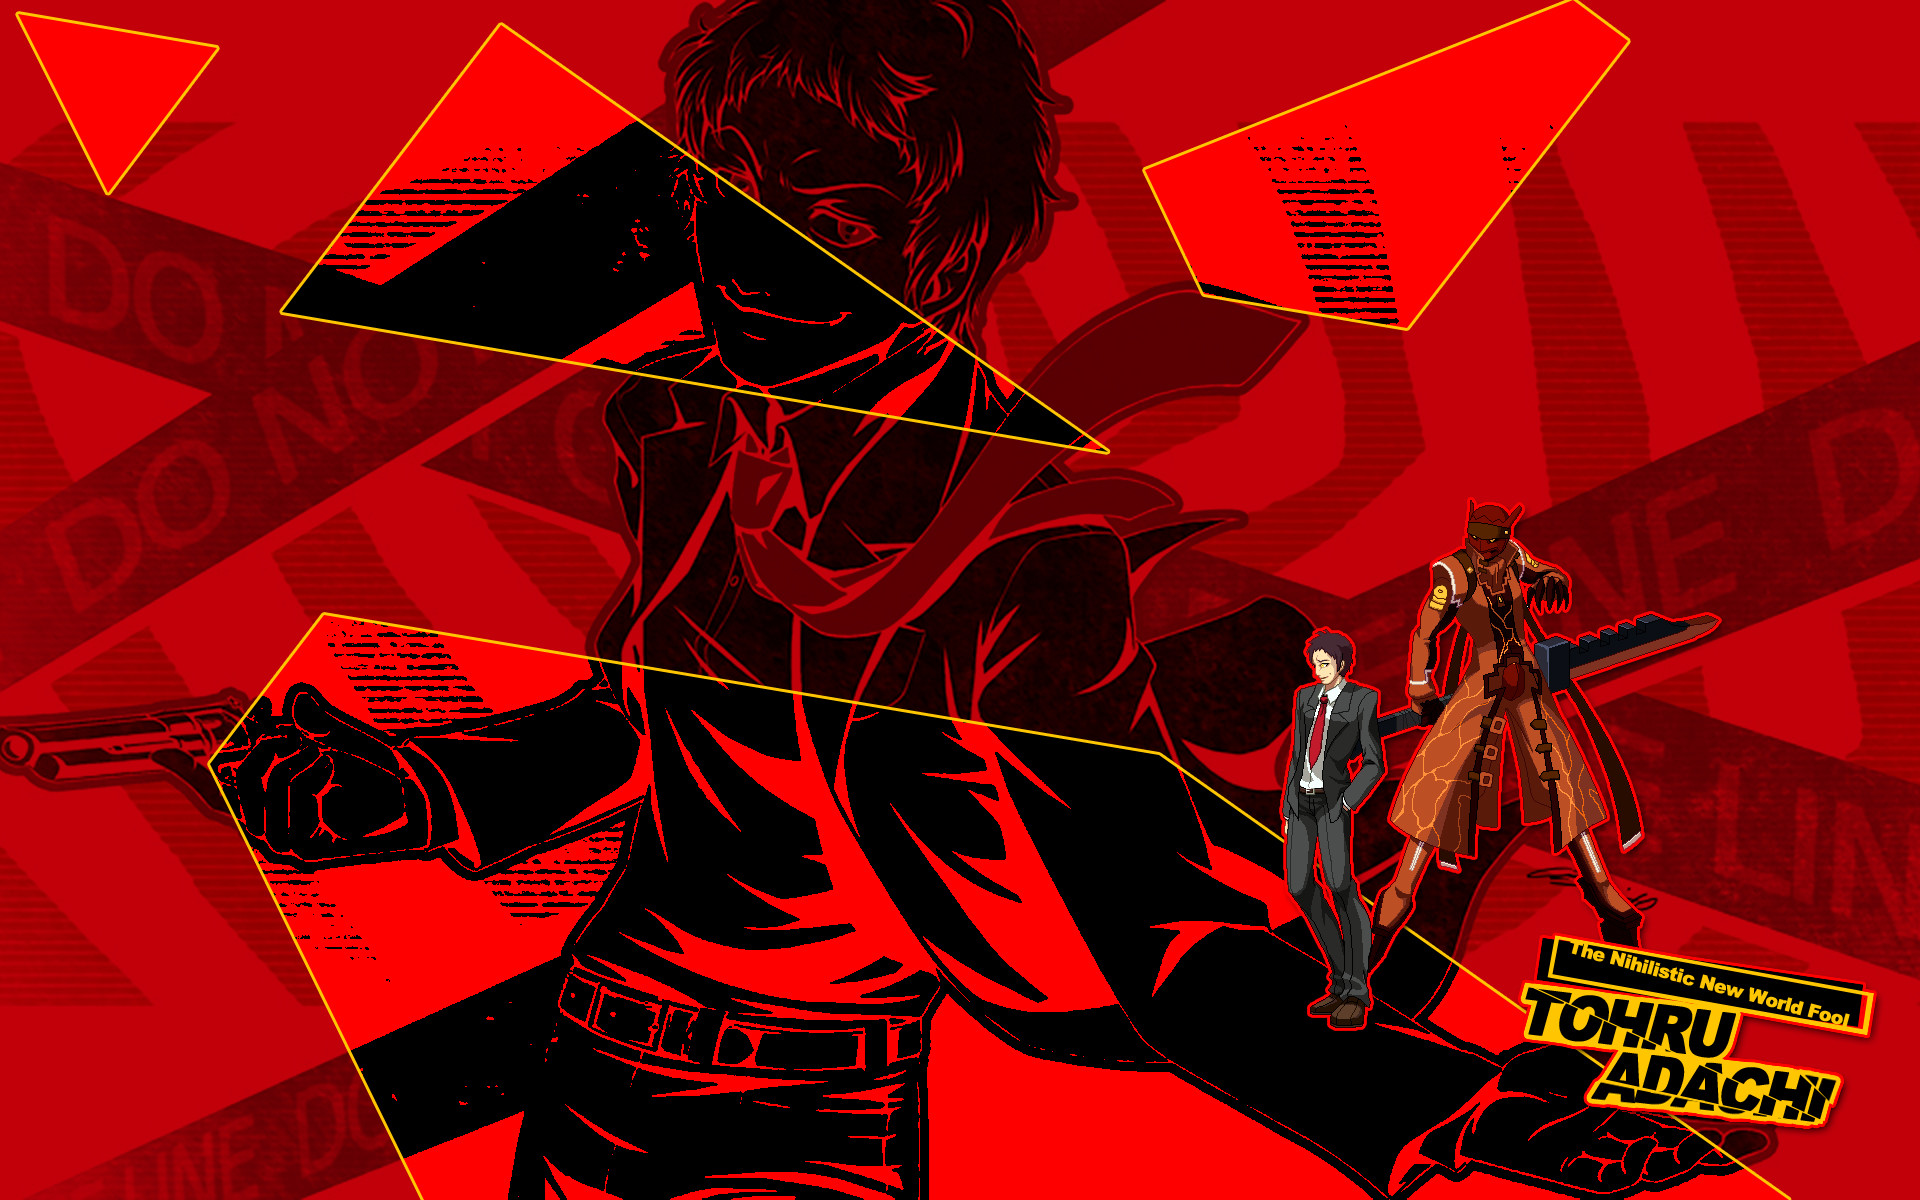 1920x1200 ... Adachi - Persona 4 UUSH HD Wallpaper for PC / PS3 by seraharcana